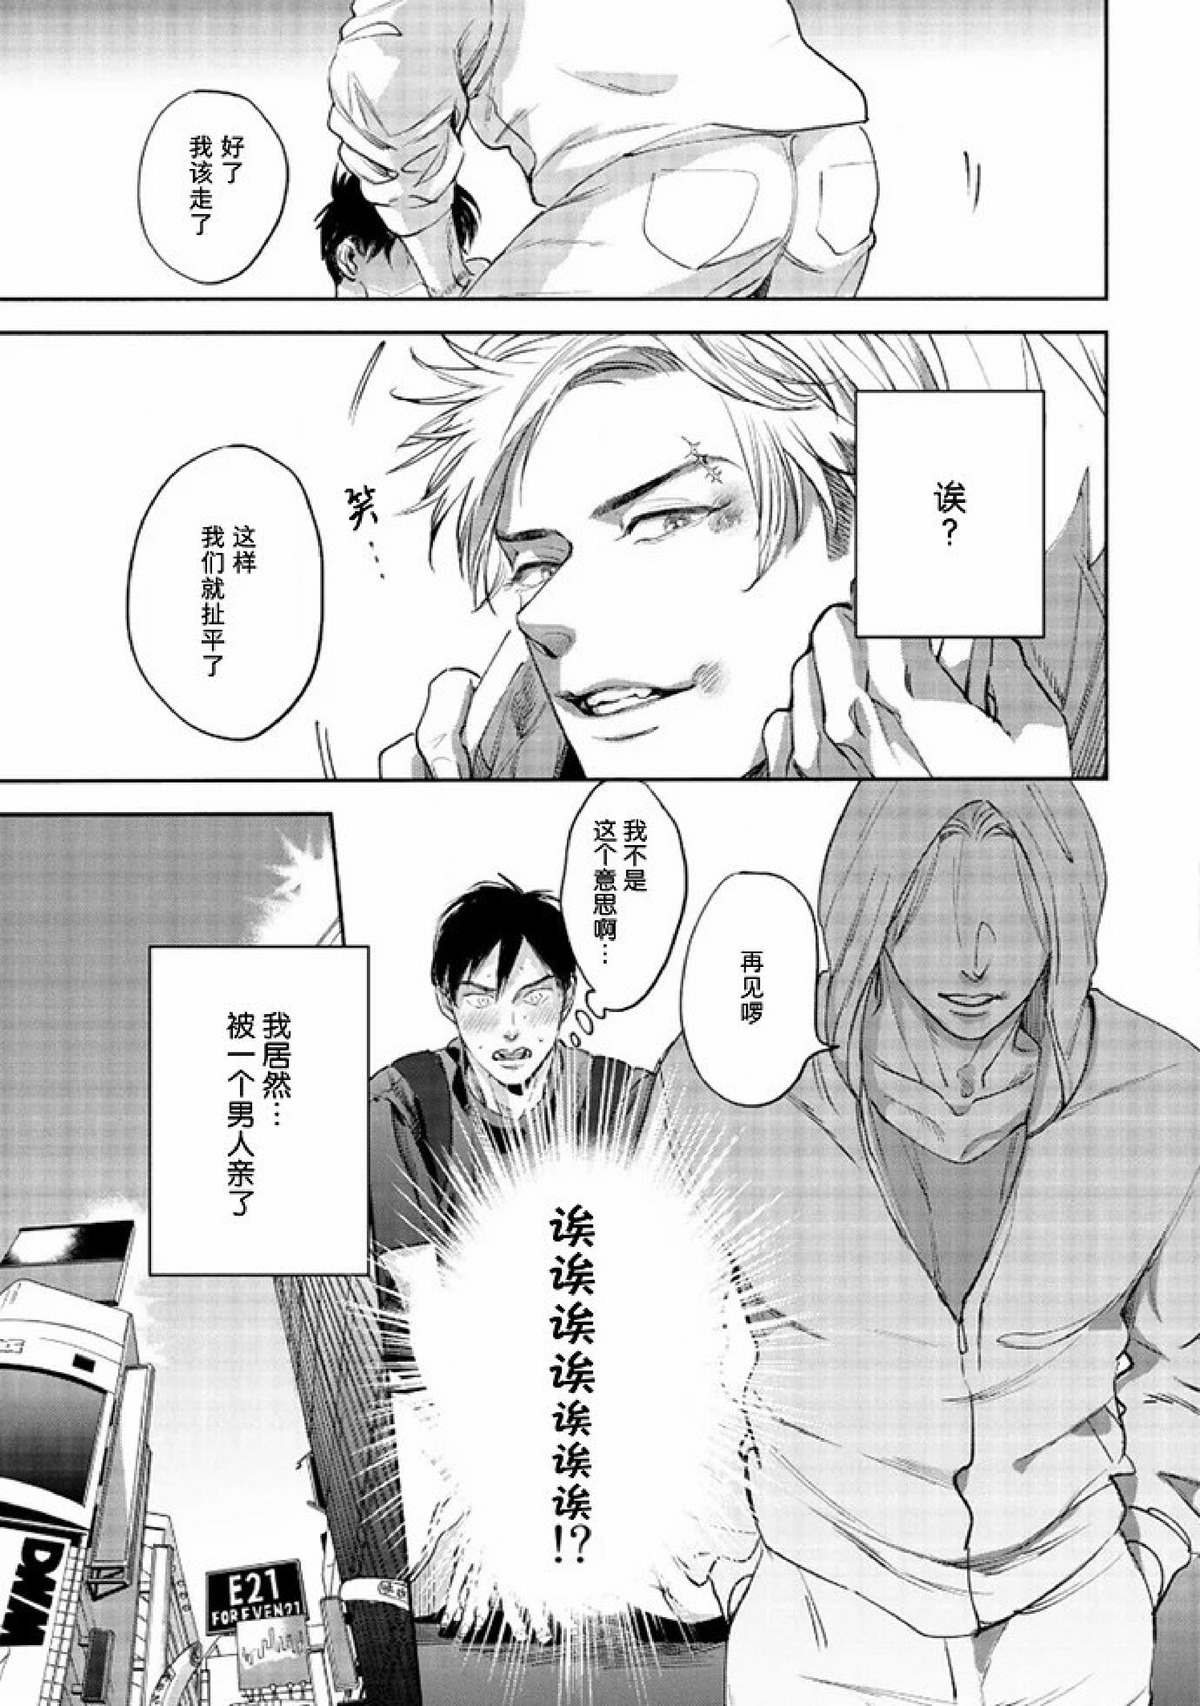 【Two sides of the same coin[腐漫]】漫画-（上卷01-02）章节漫画下拉式图片-39.jpg